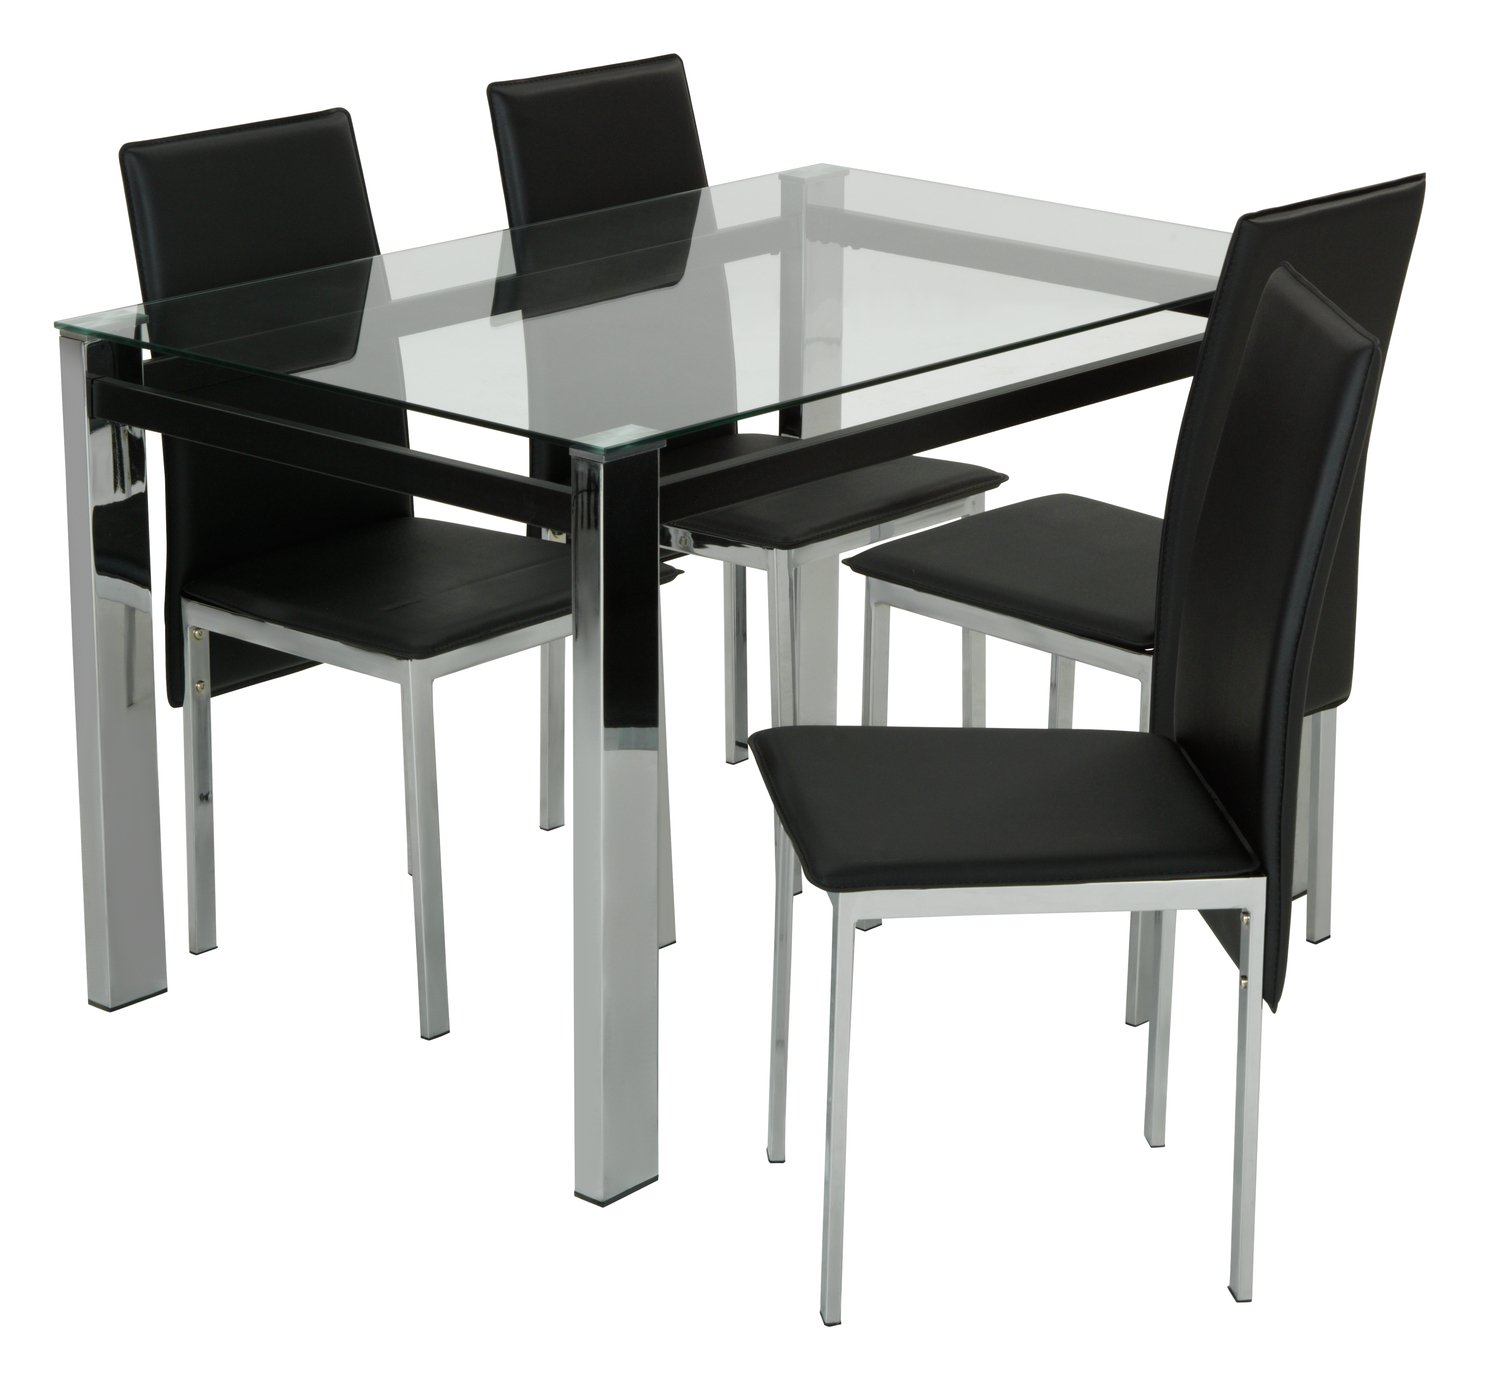 Argos Home Fitz Clear Glass Dining Table & 4 Black Chairs